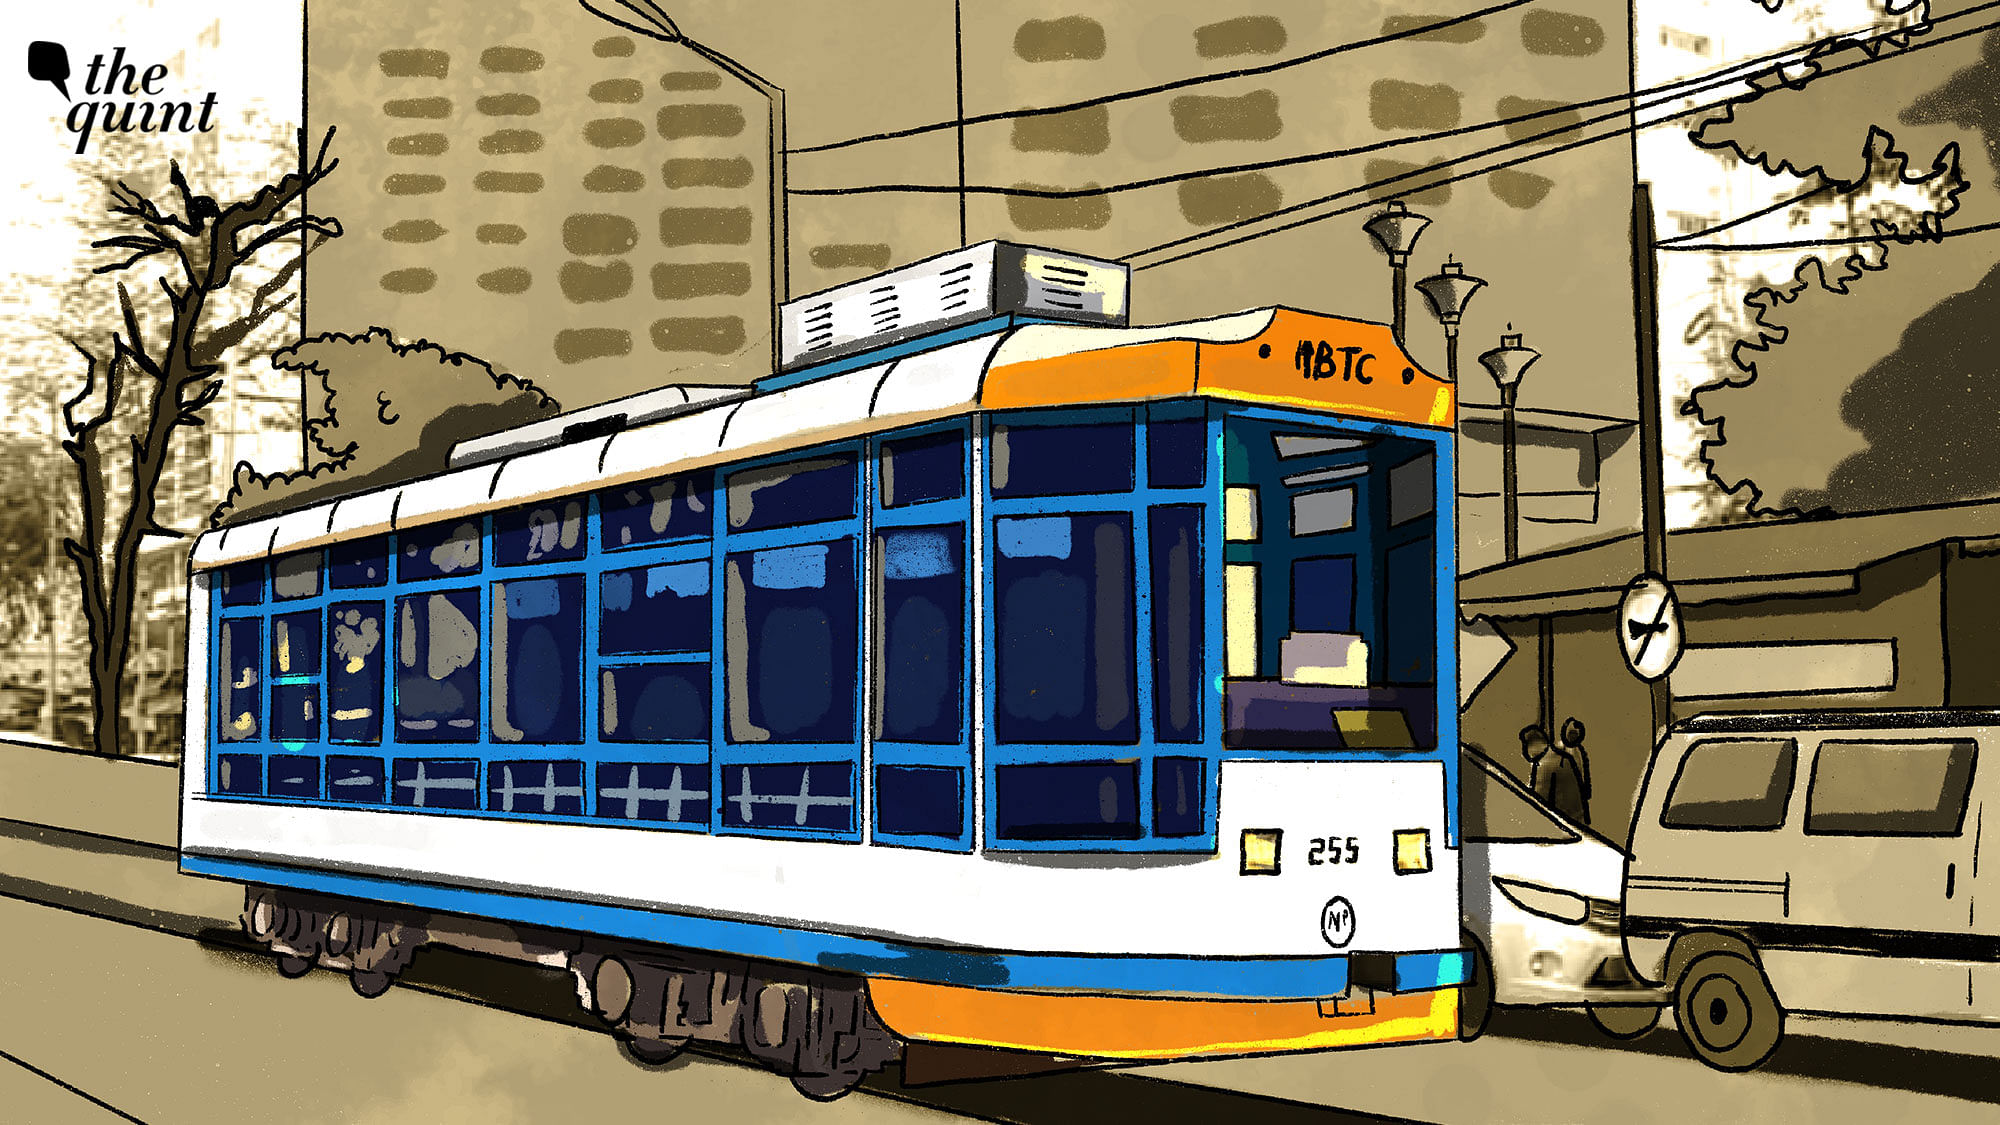 Future of Kolkatas trams in question Functional mode of transport or  nostalgic ode to the city  News9live